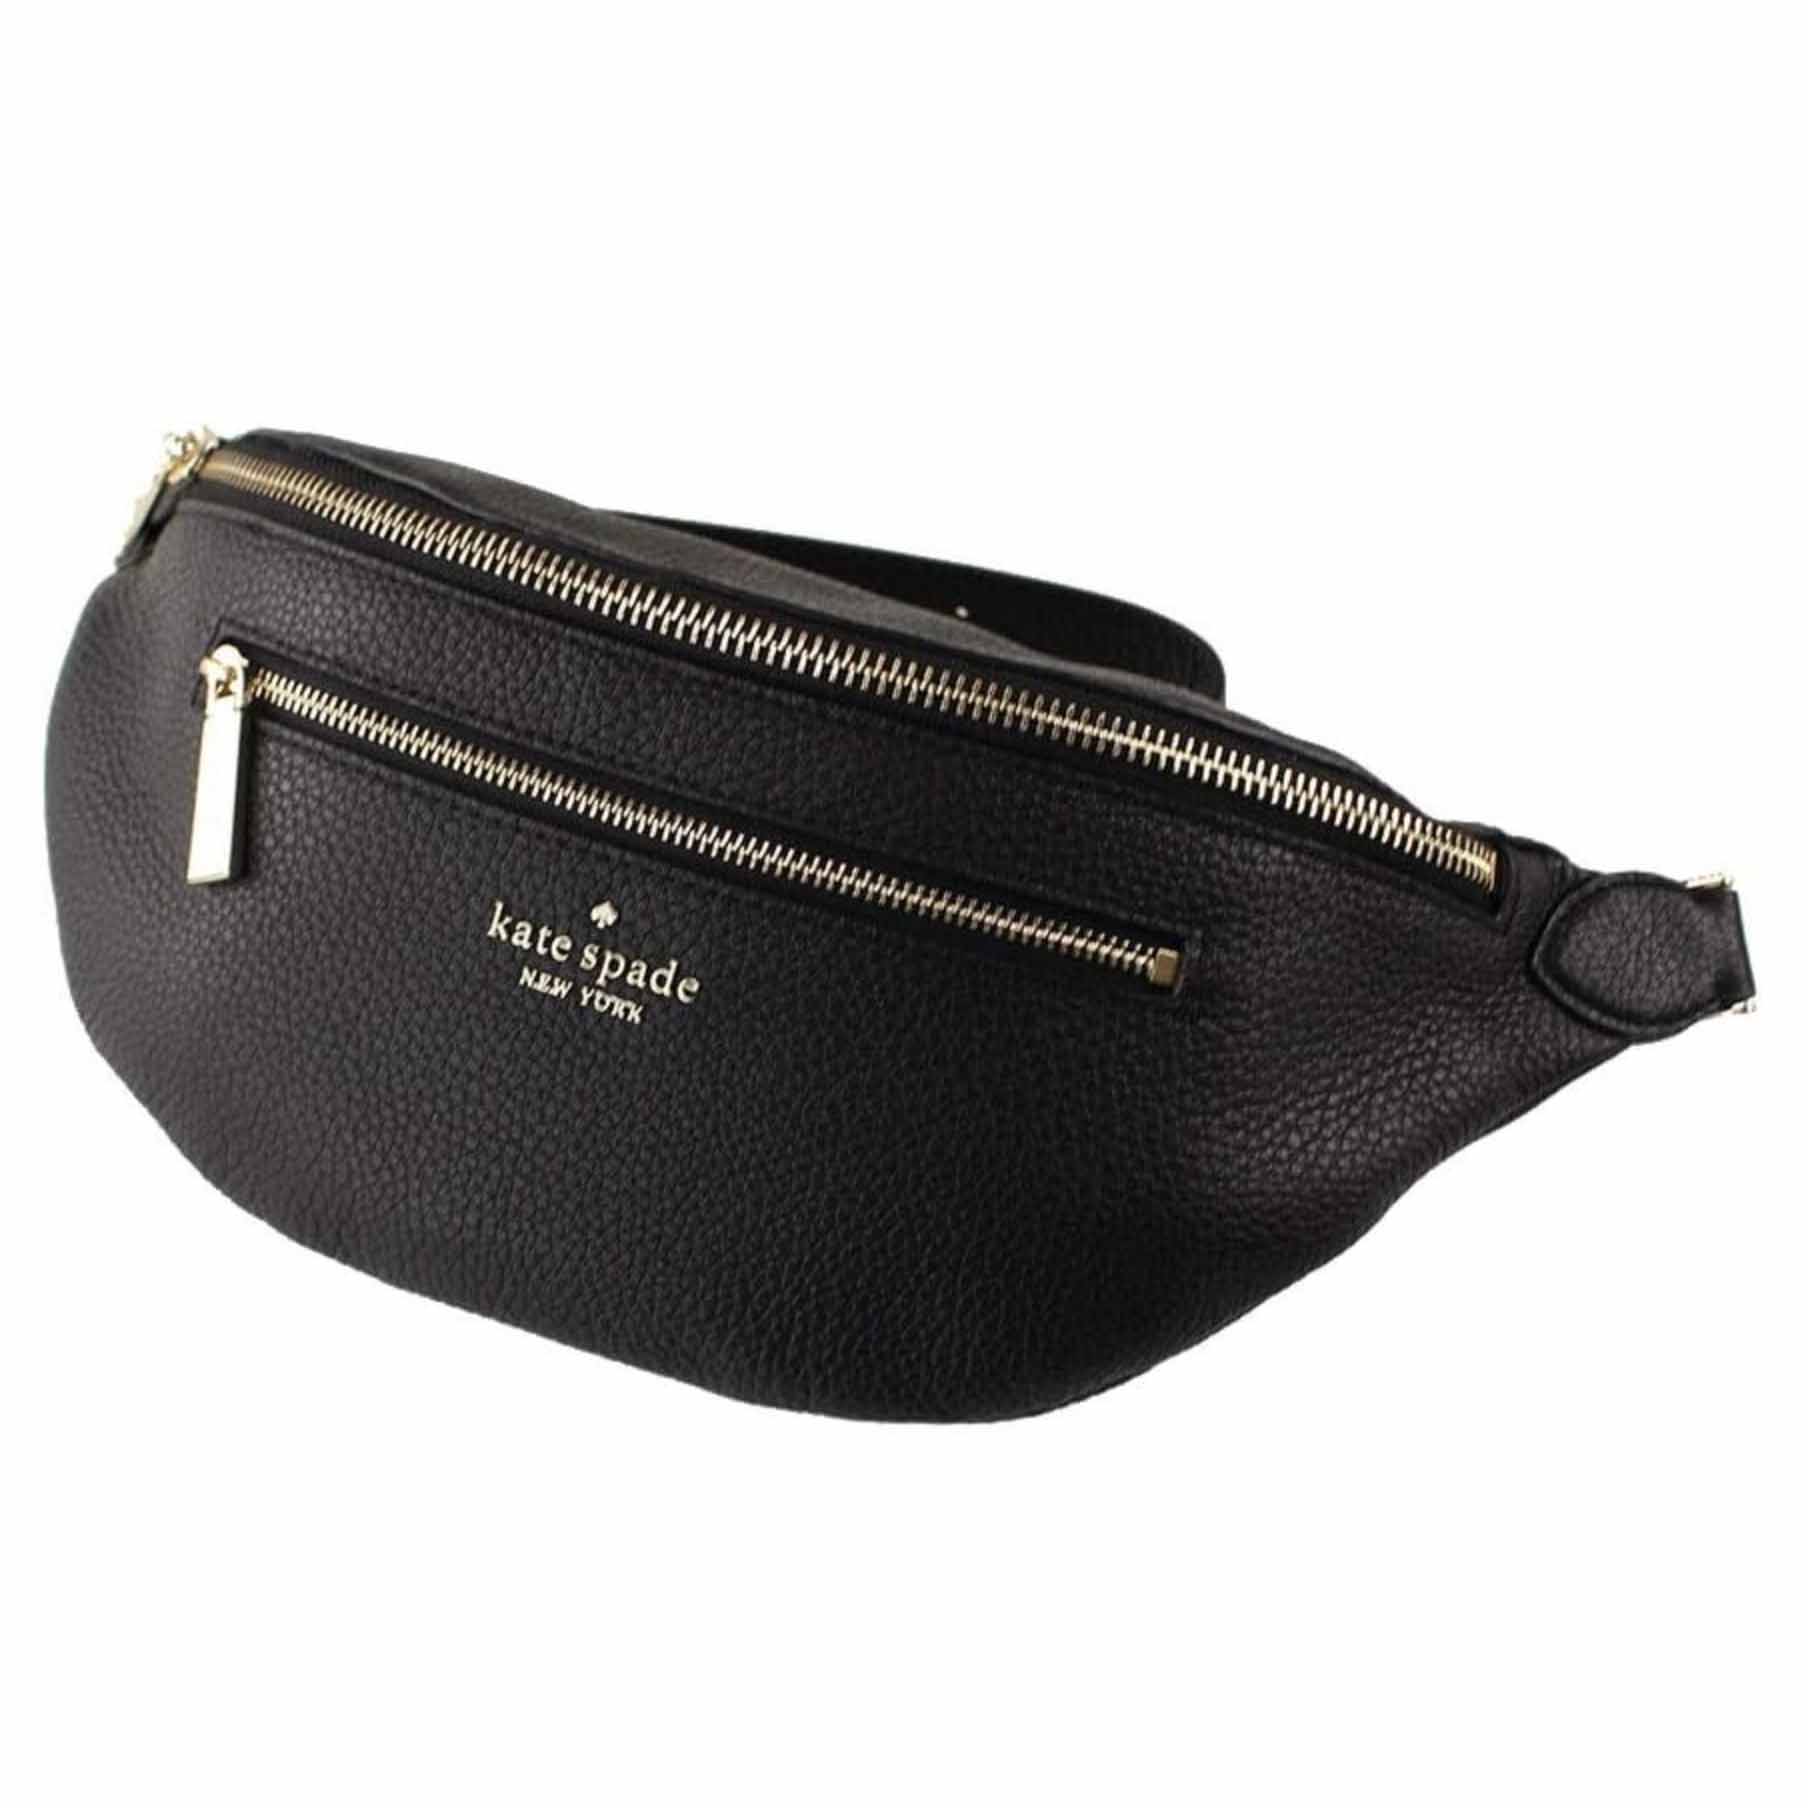 Black Kate Spade leather fanny pack